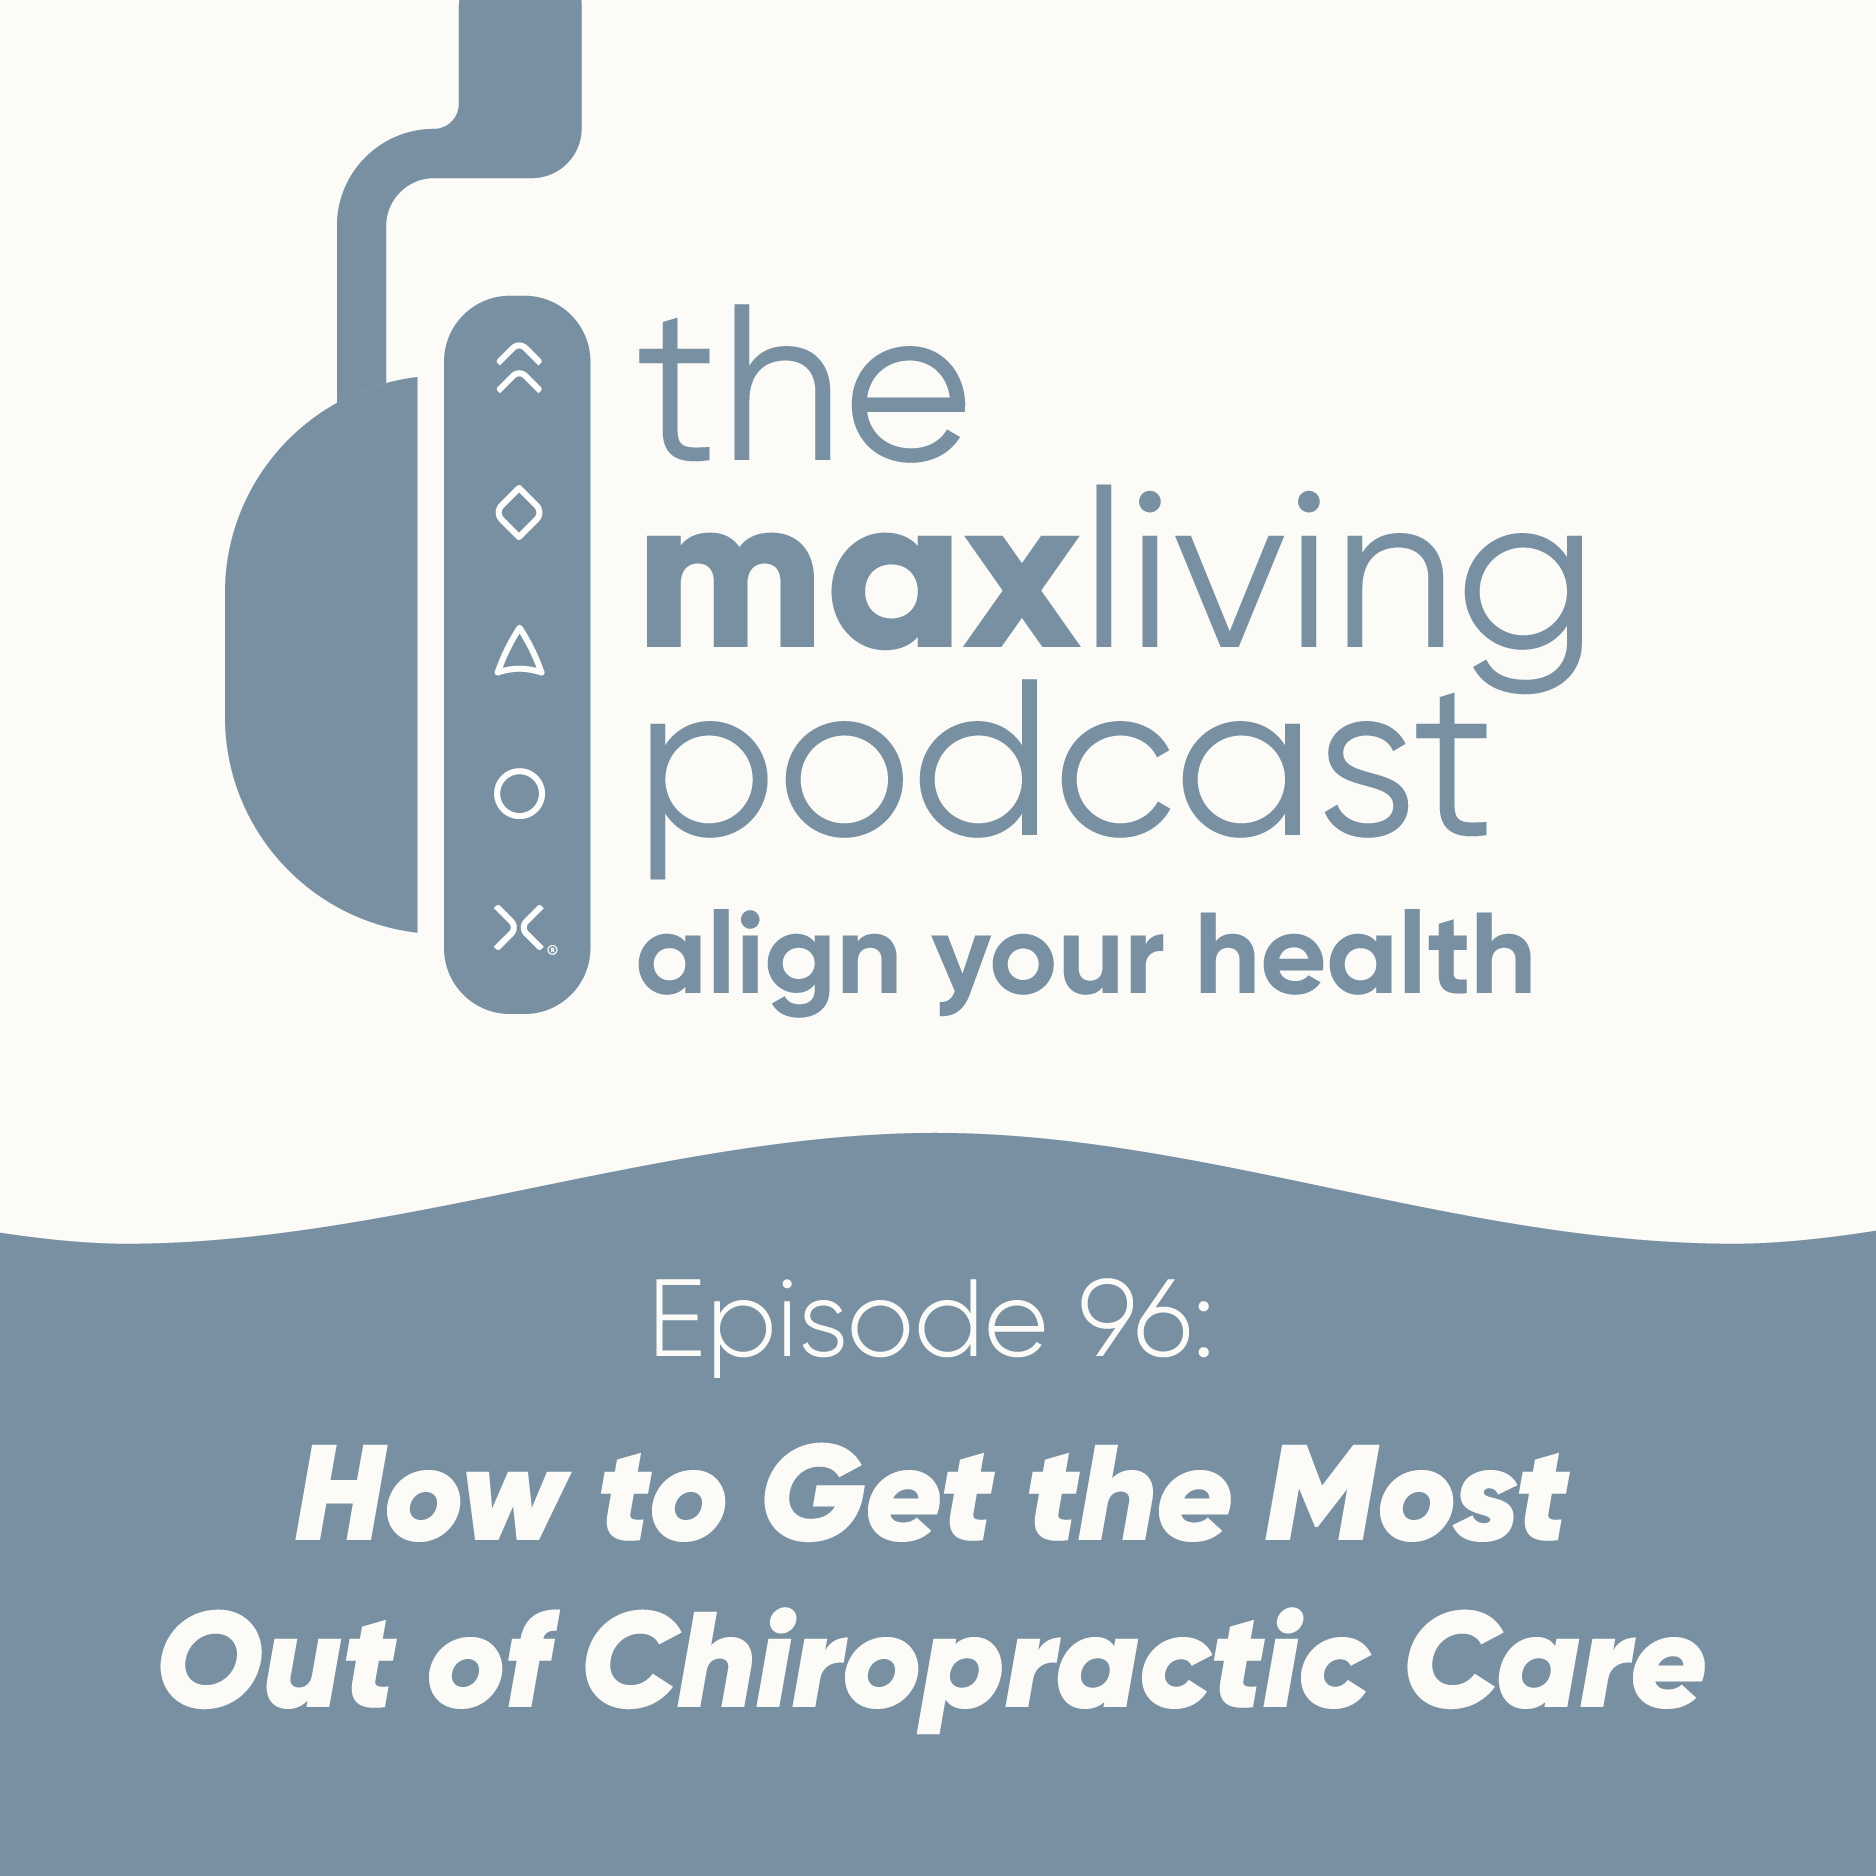 How to Get the Most Out of Chiropractic Care